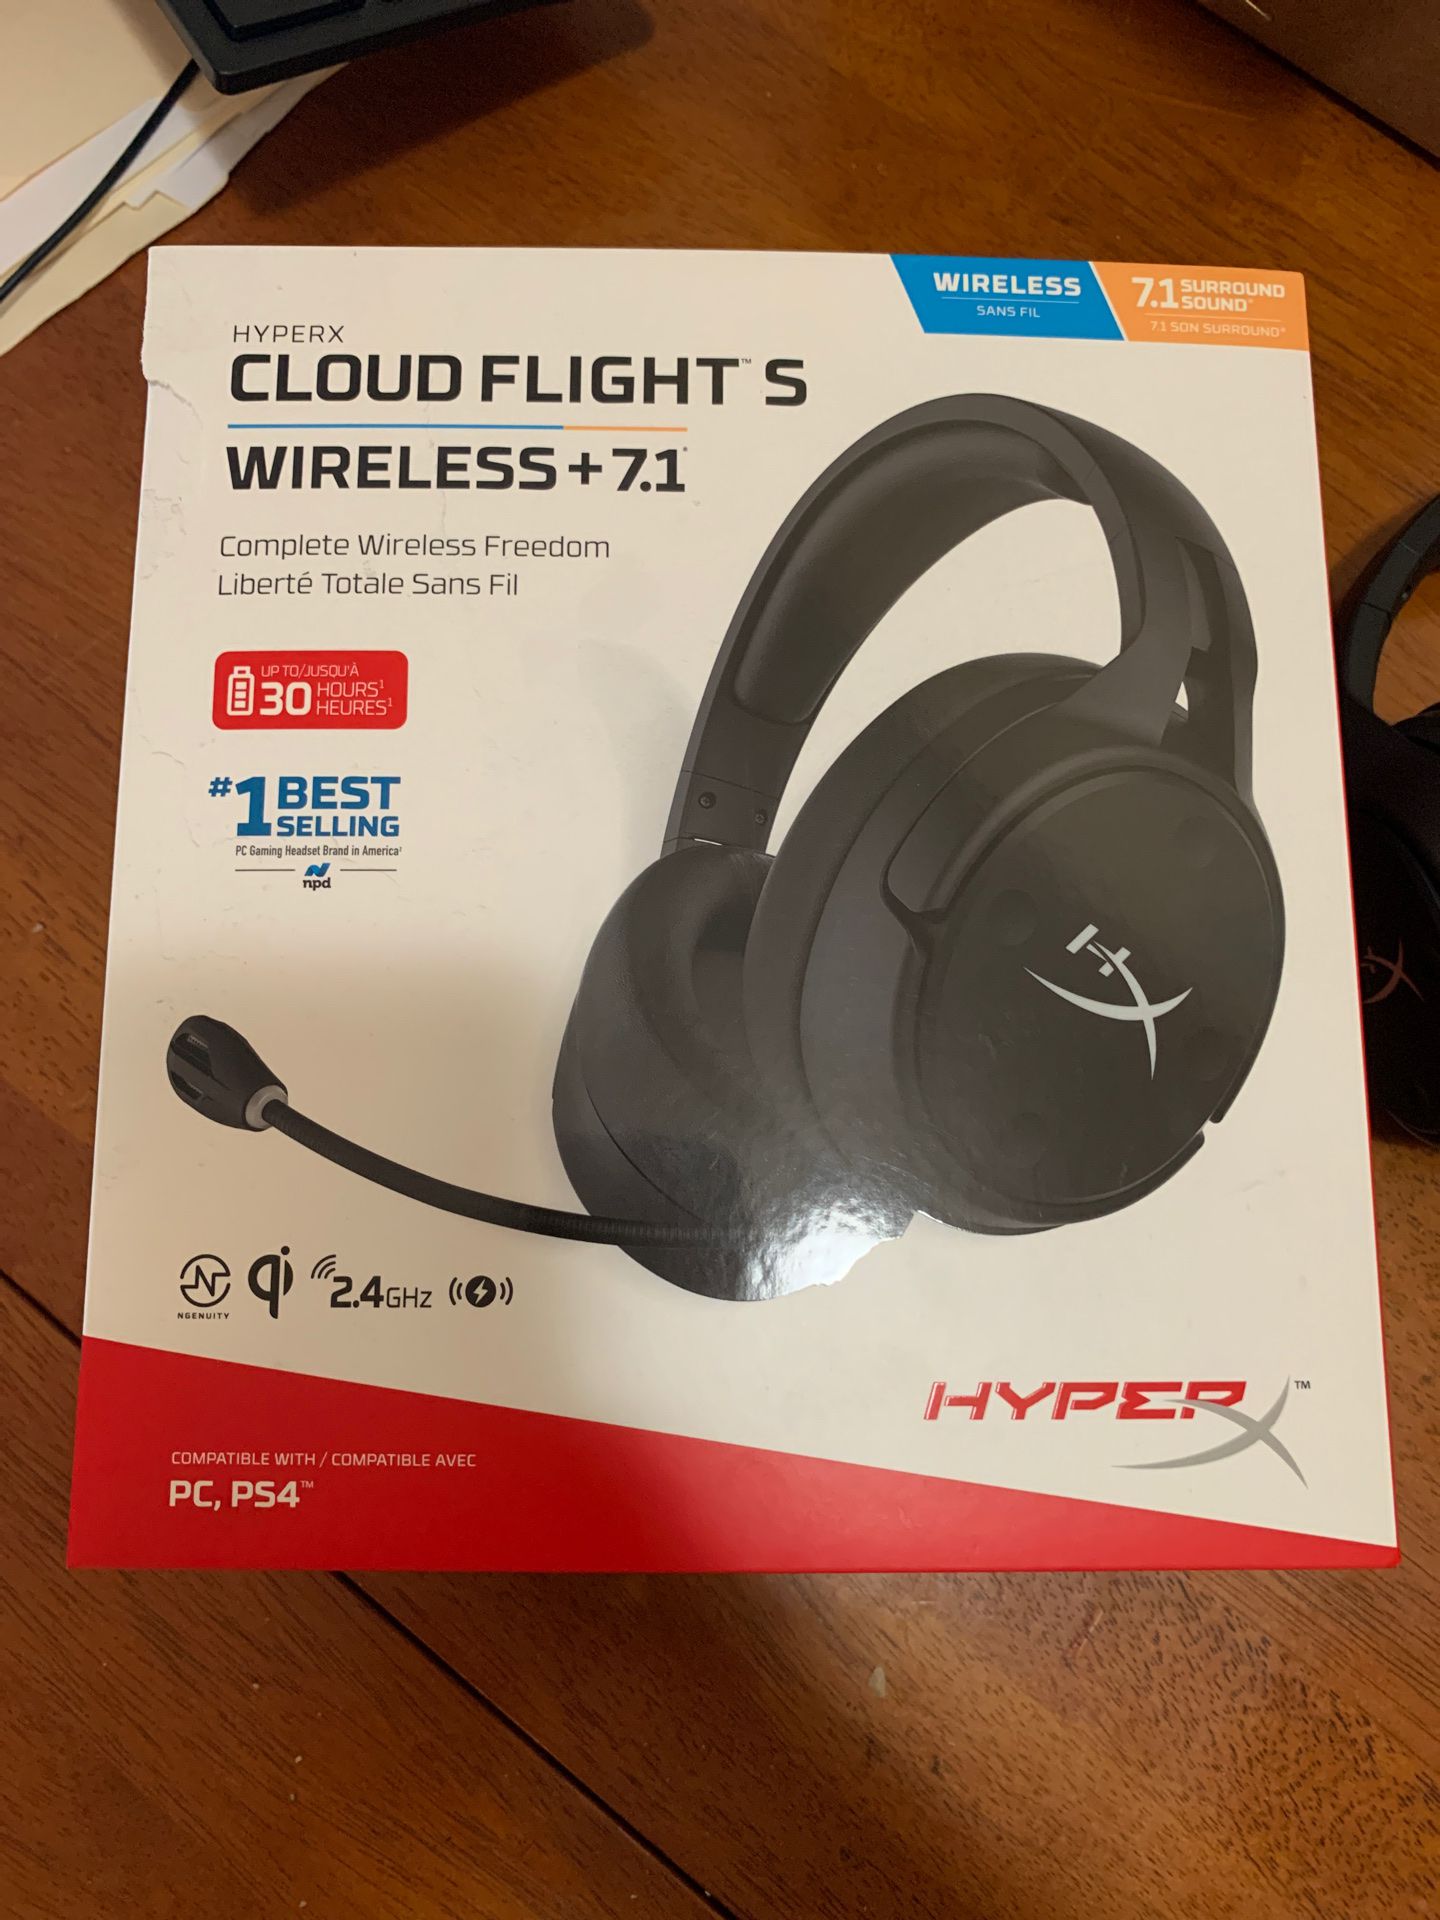 Brand new Cloud Flight S wireless headset for PC and Ps4